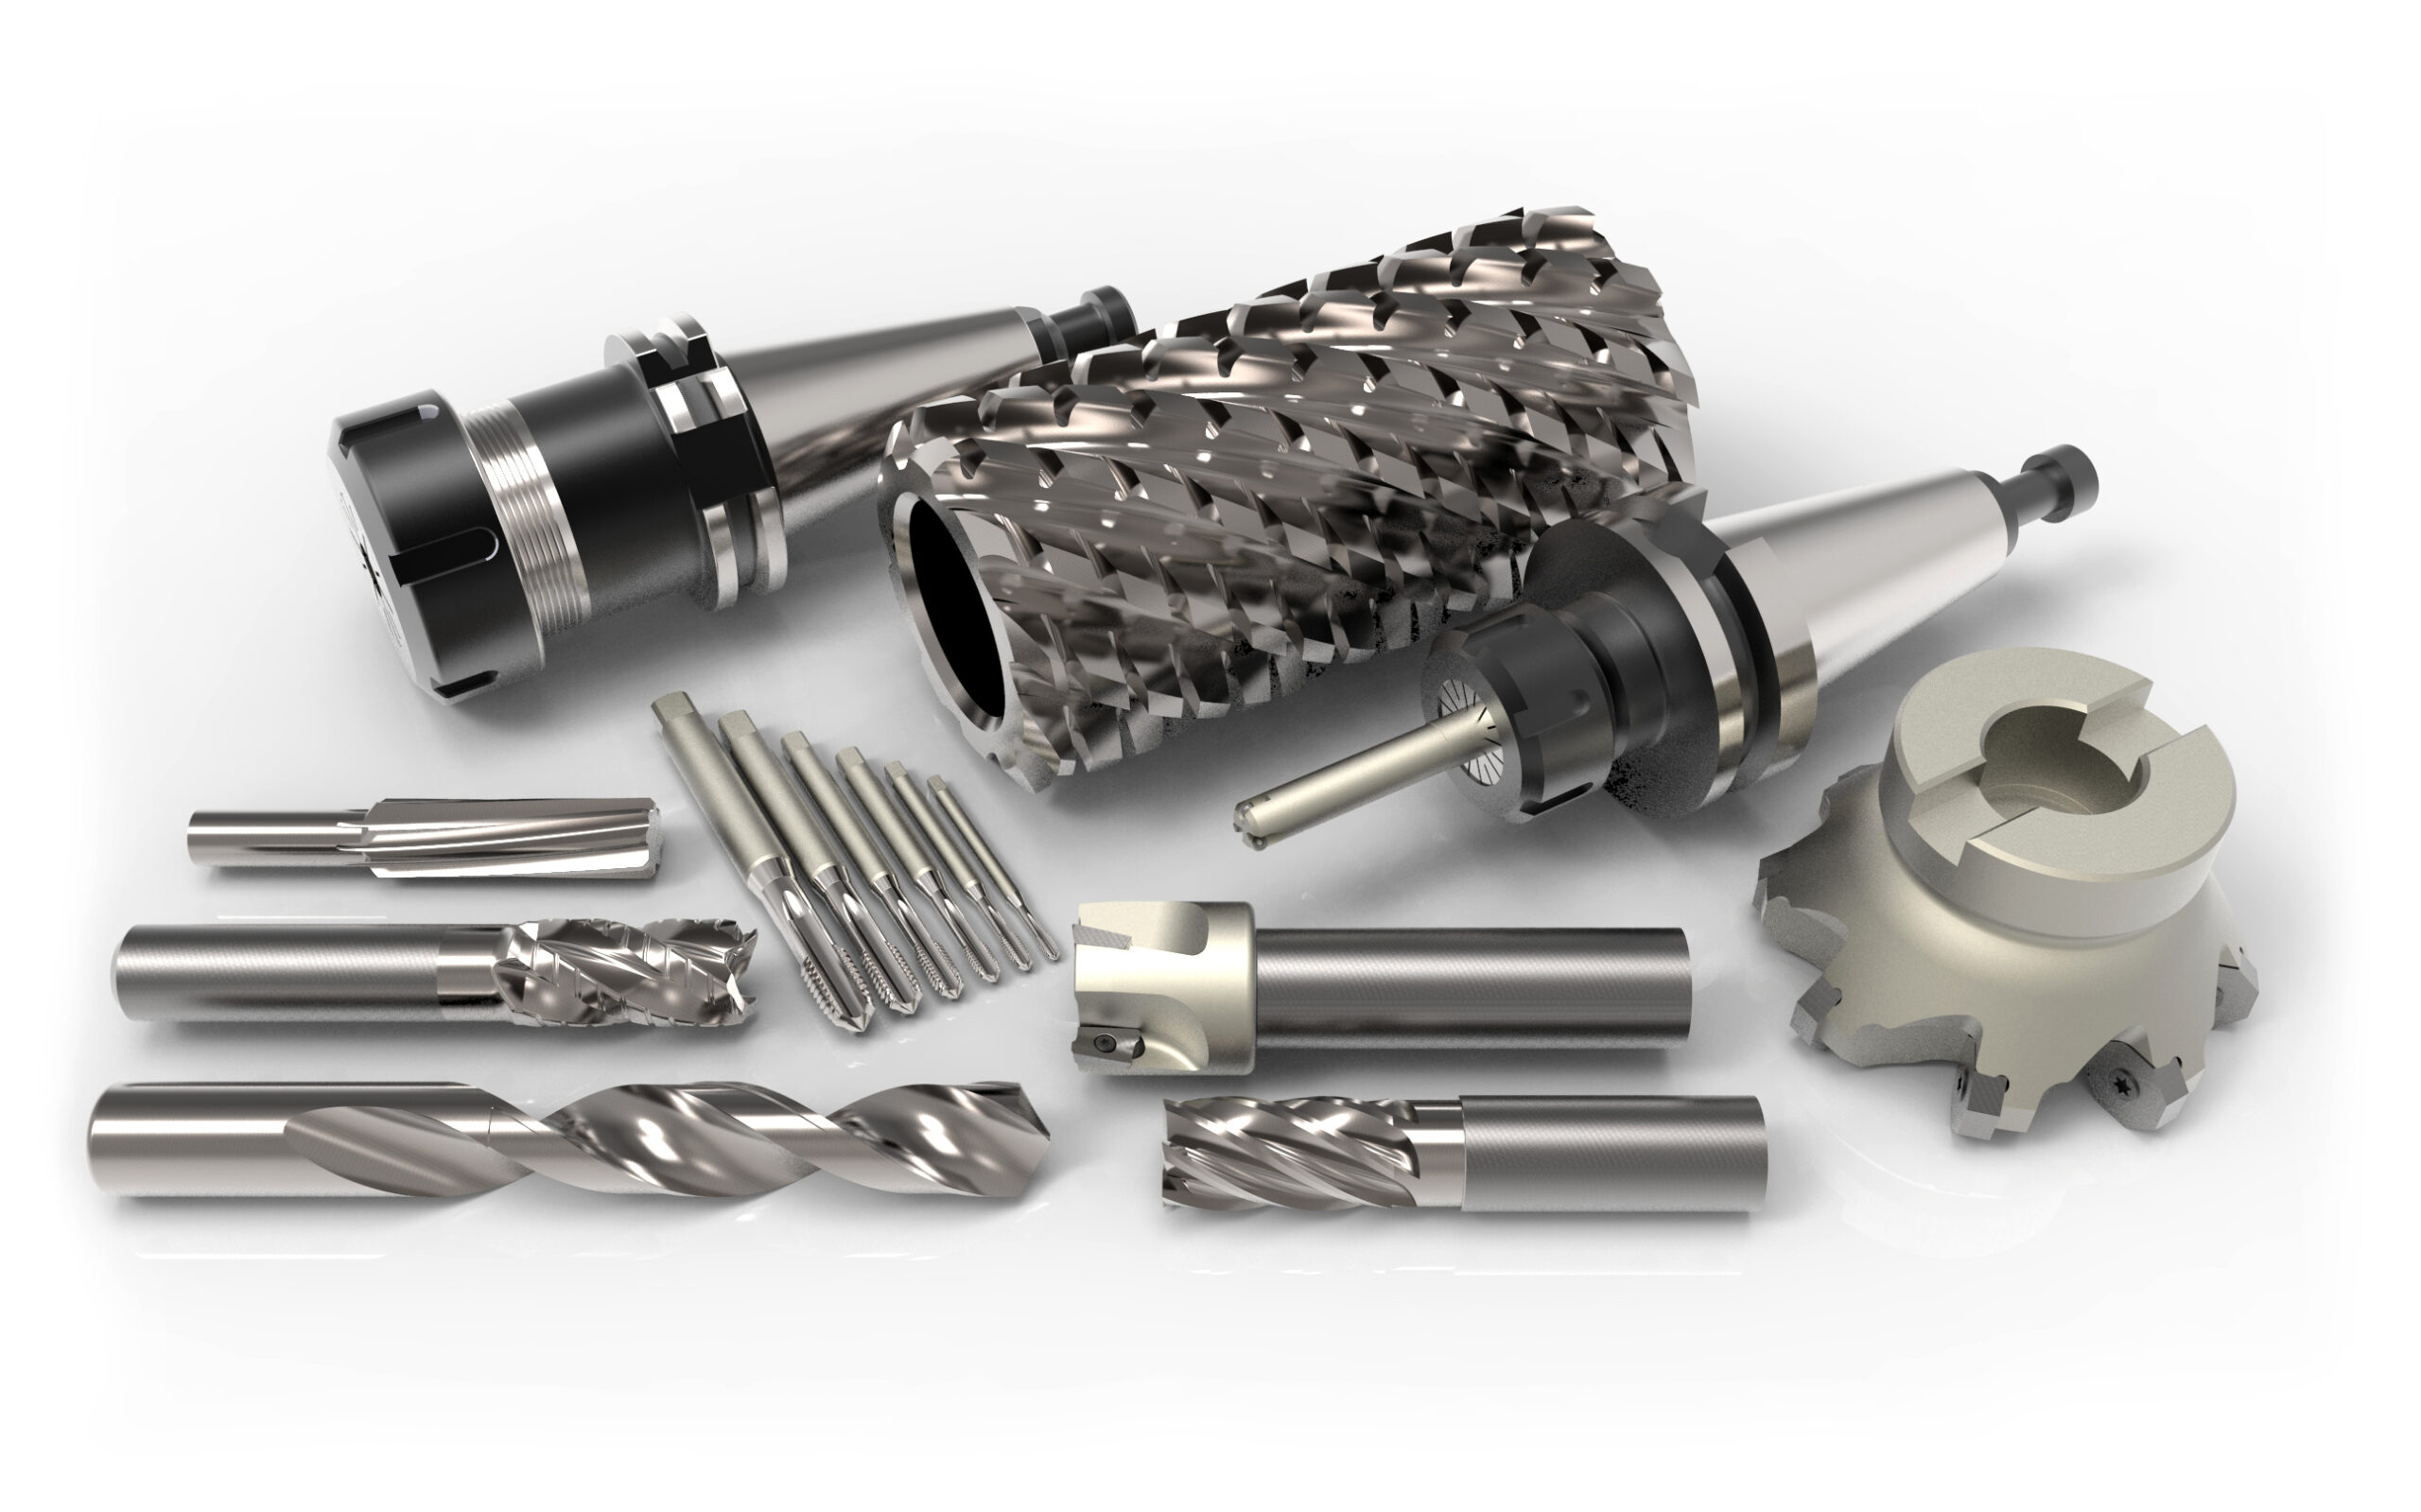 Metal milling tools for cnc machine on white background 3D rendering